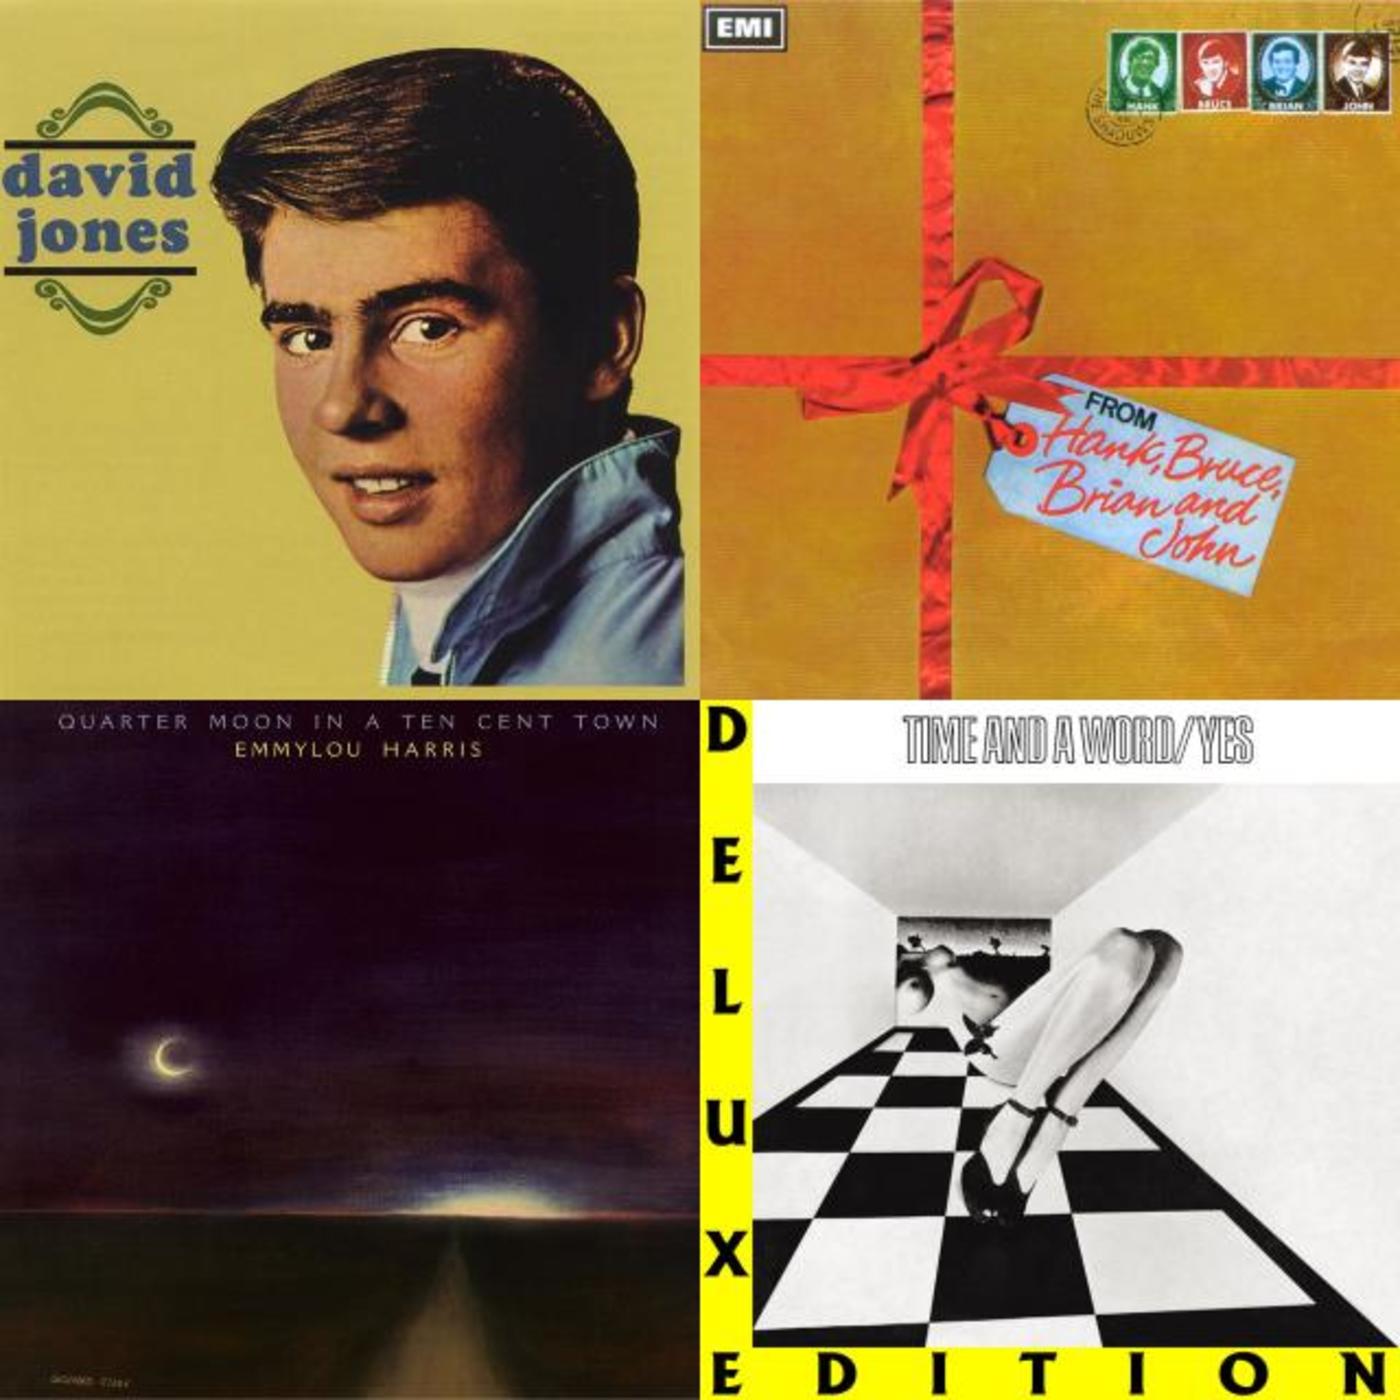 Snap, Crackle, and How's Your Dad? A Father's Day Playlist - The Shadows, Emmylou Harris, Yes, David Jones, The Monkees, Tim Buckley, Tony Joe White, Judy Collins, Jesse Frederick